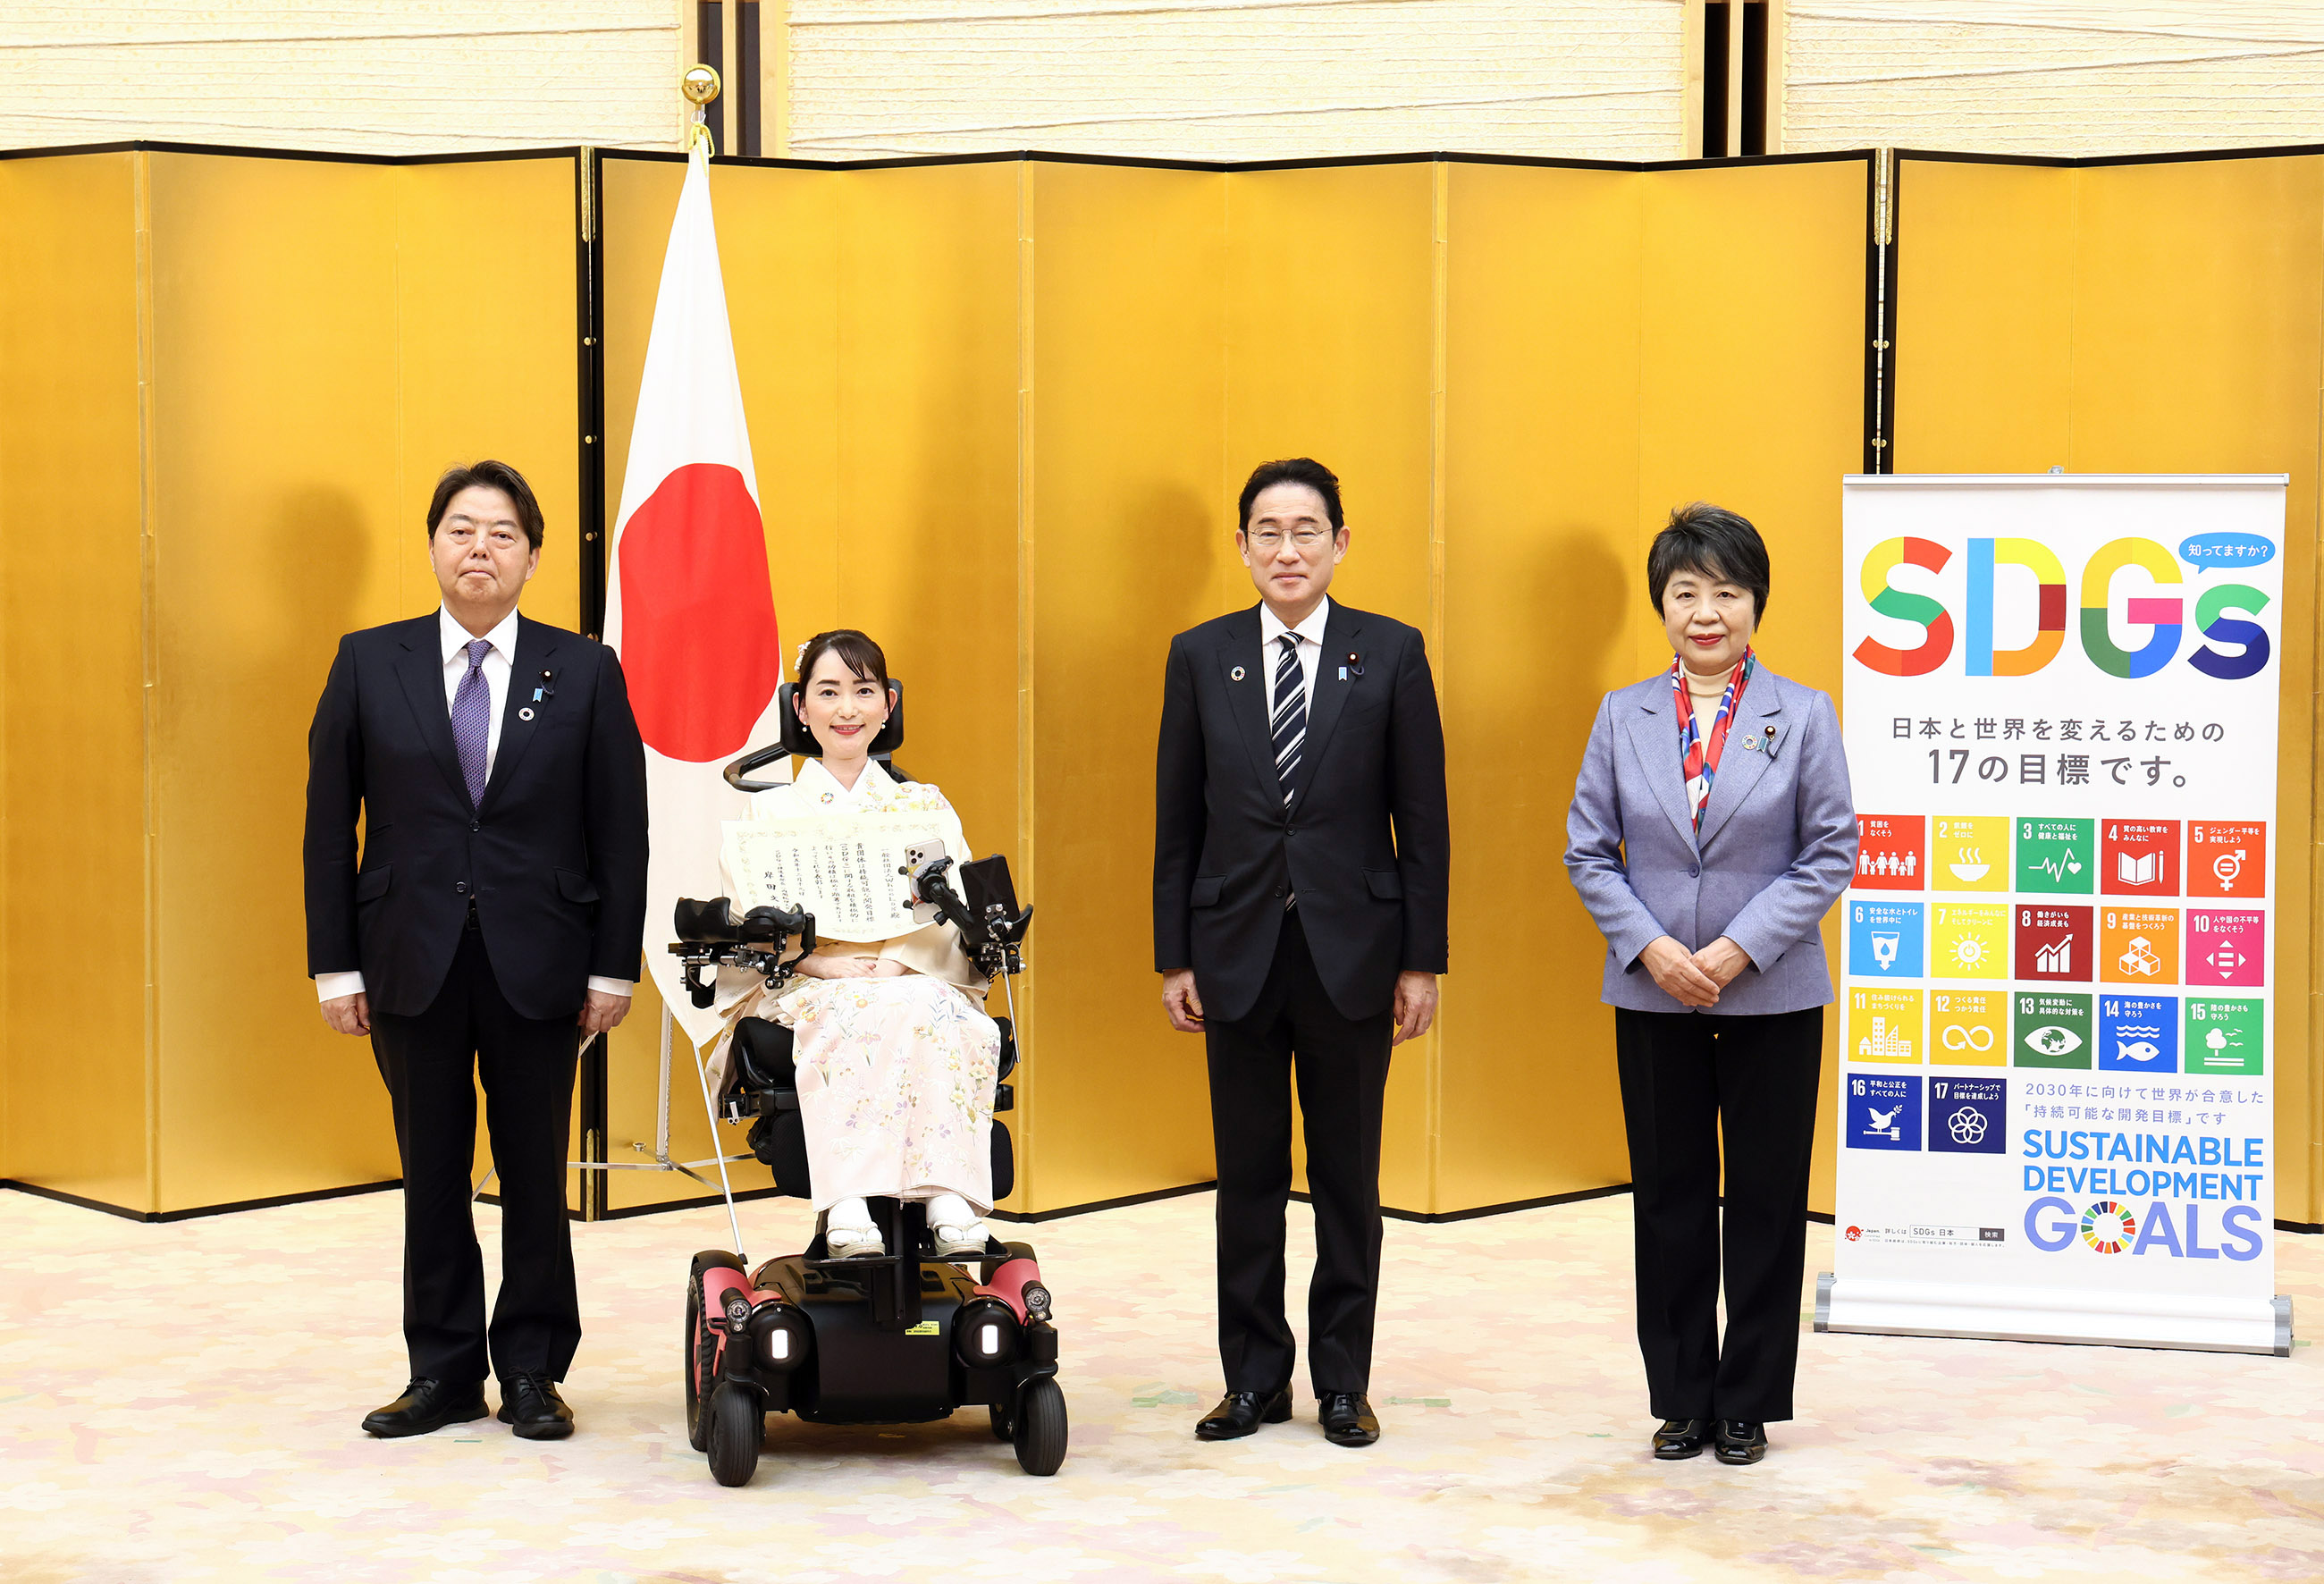 Commemorative photo session with the recipients (1)